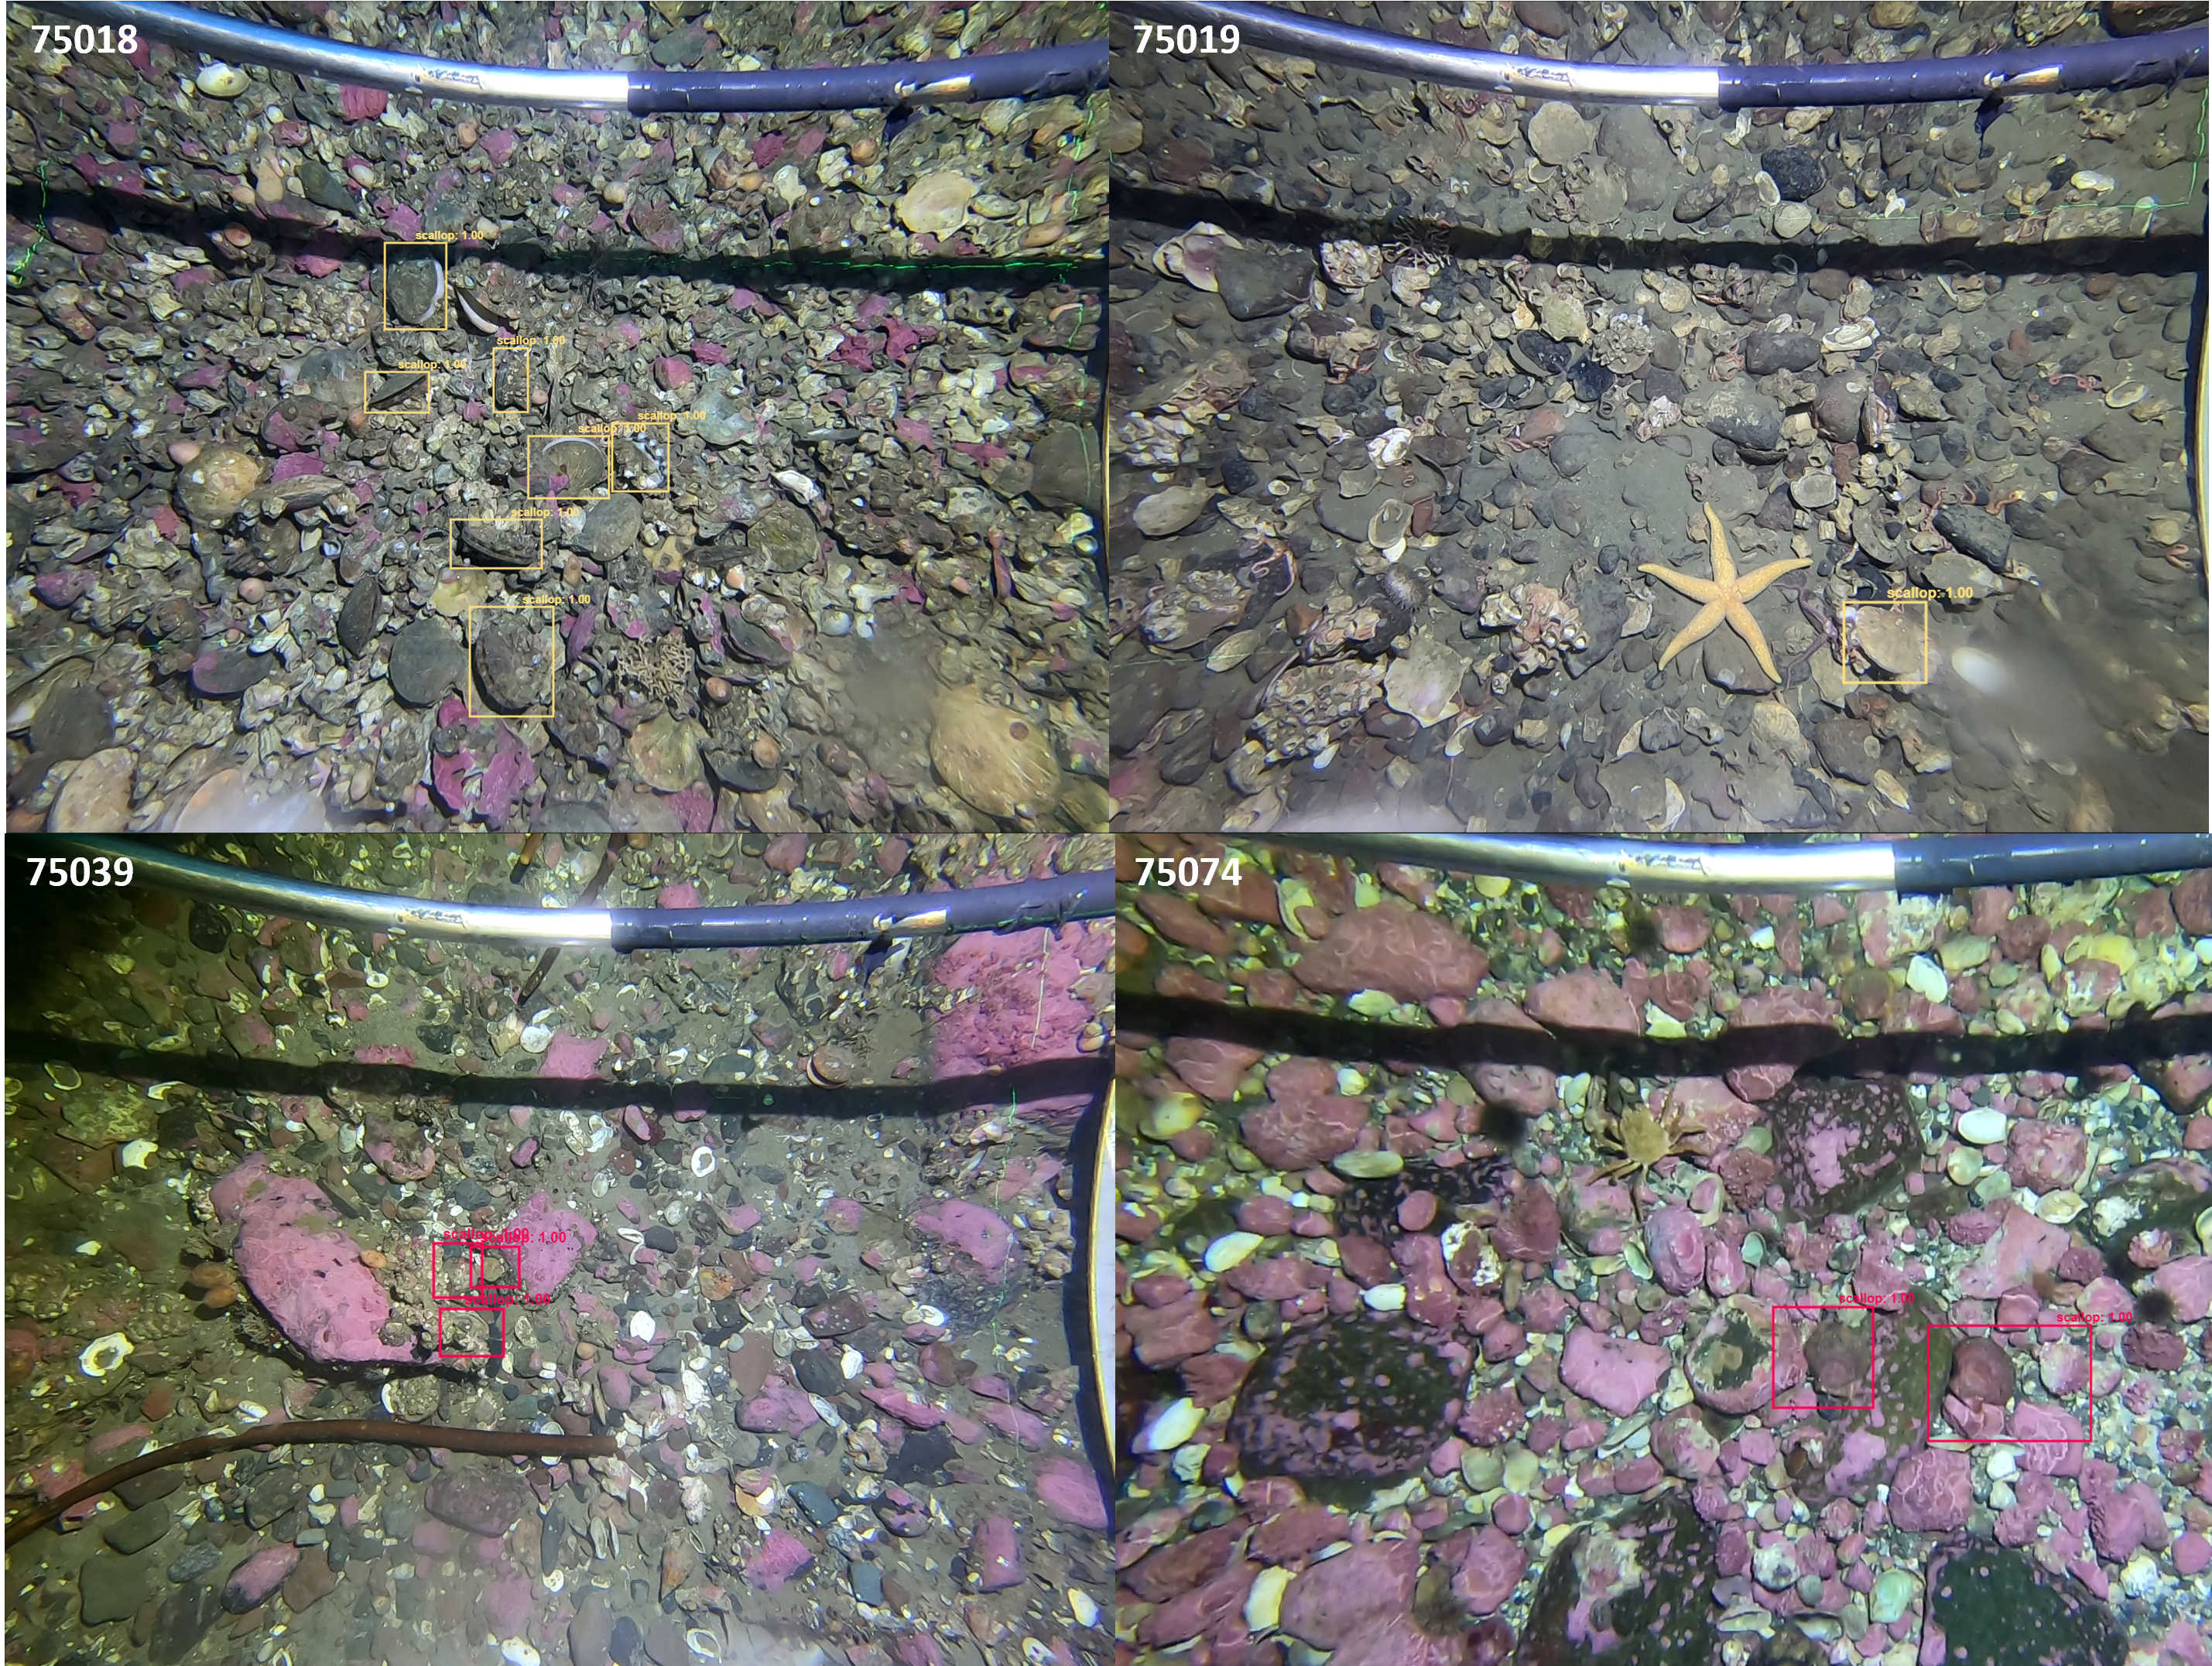 Examples of annotated still images from four stations illustrating variation in density and bottom substrate. Images are from Moffen outside of the protected area (75018 and 75019), inside the protected area (75039), and Parryflaket (75074). Annotation boxes represent observations that were considered living scallops by the annotator.